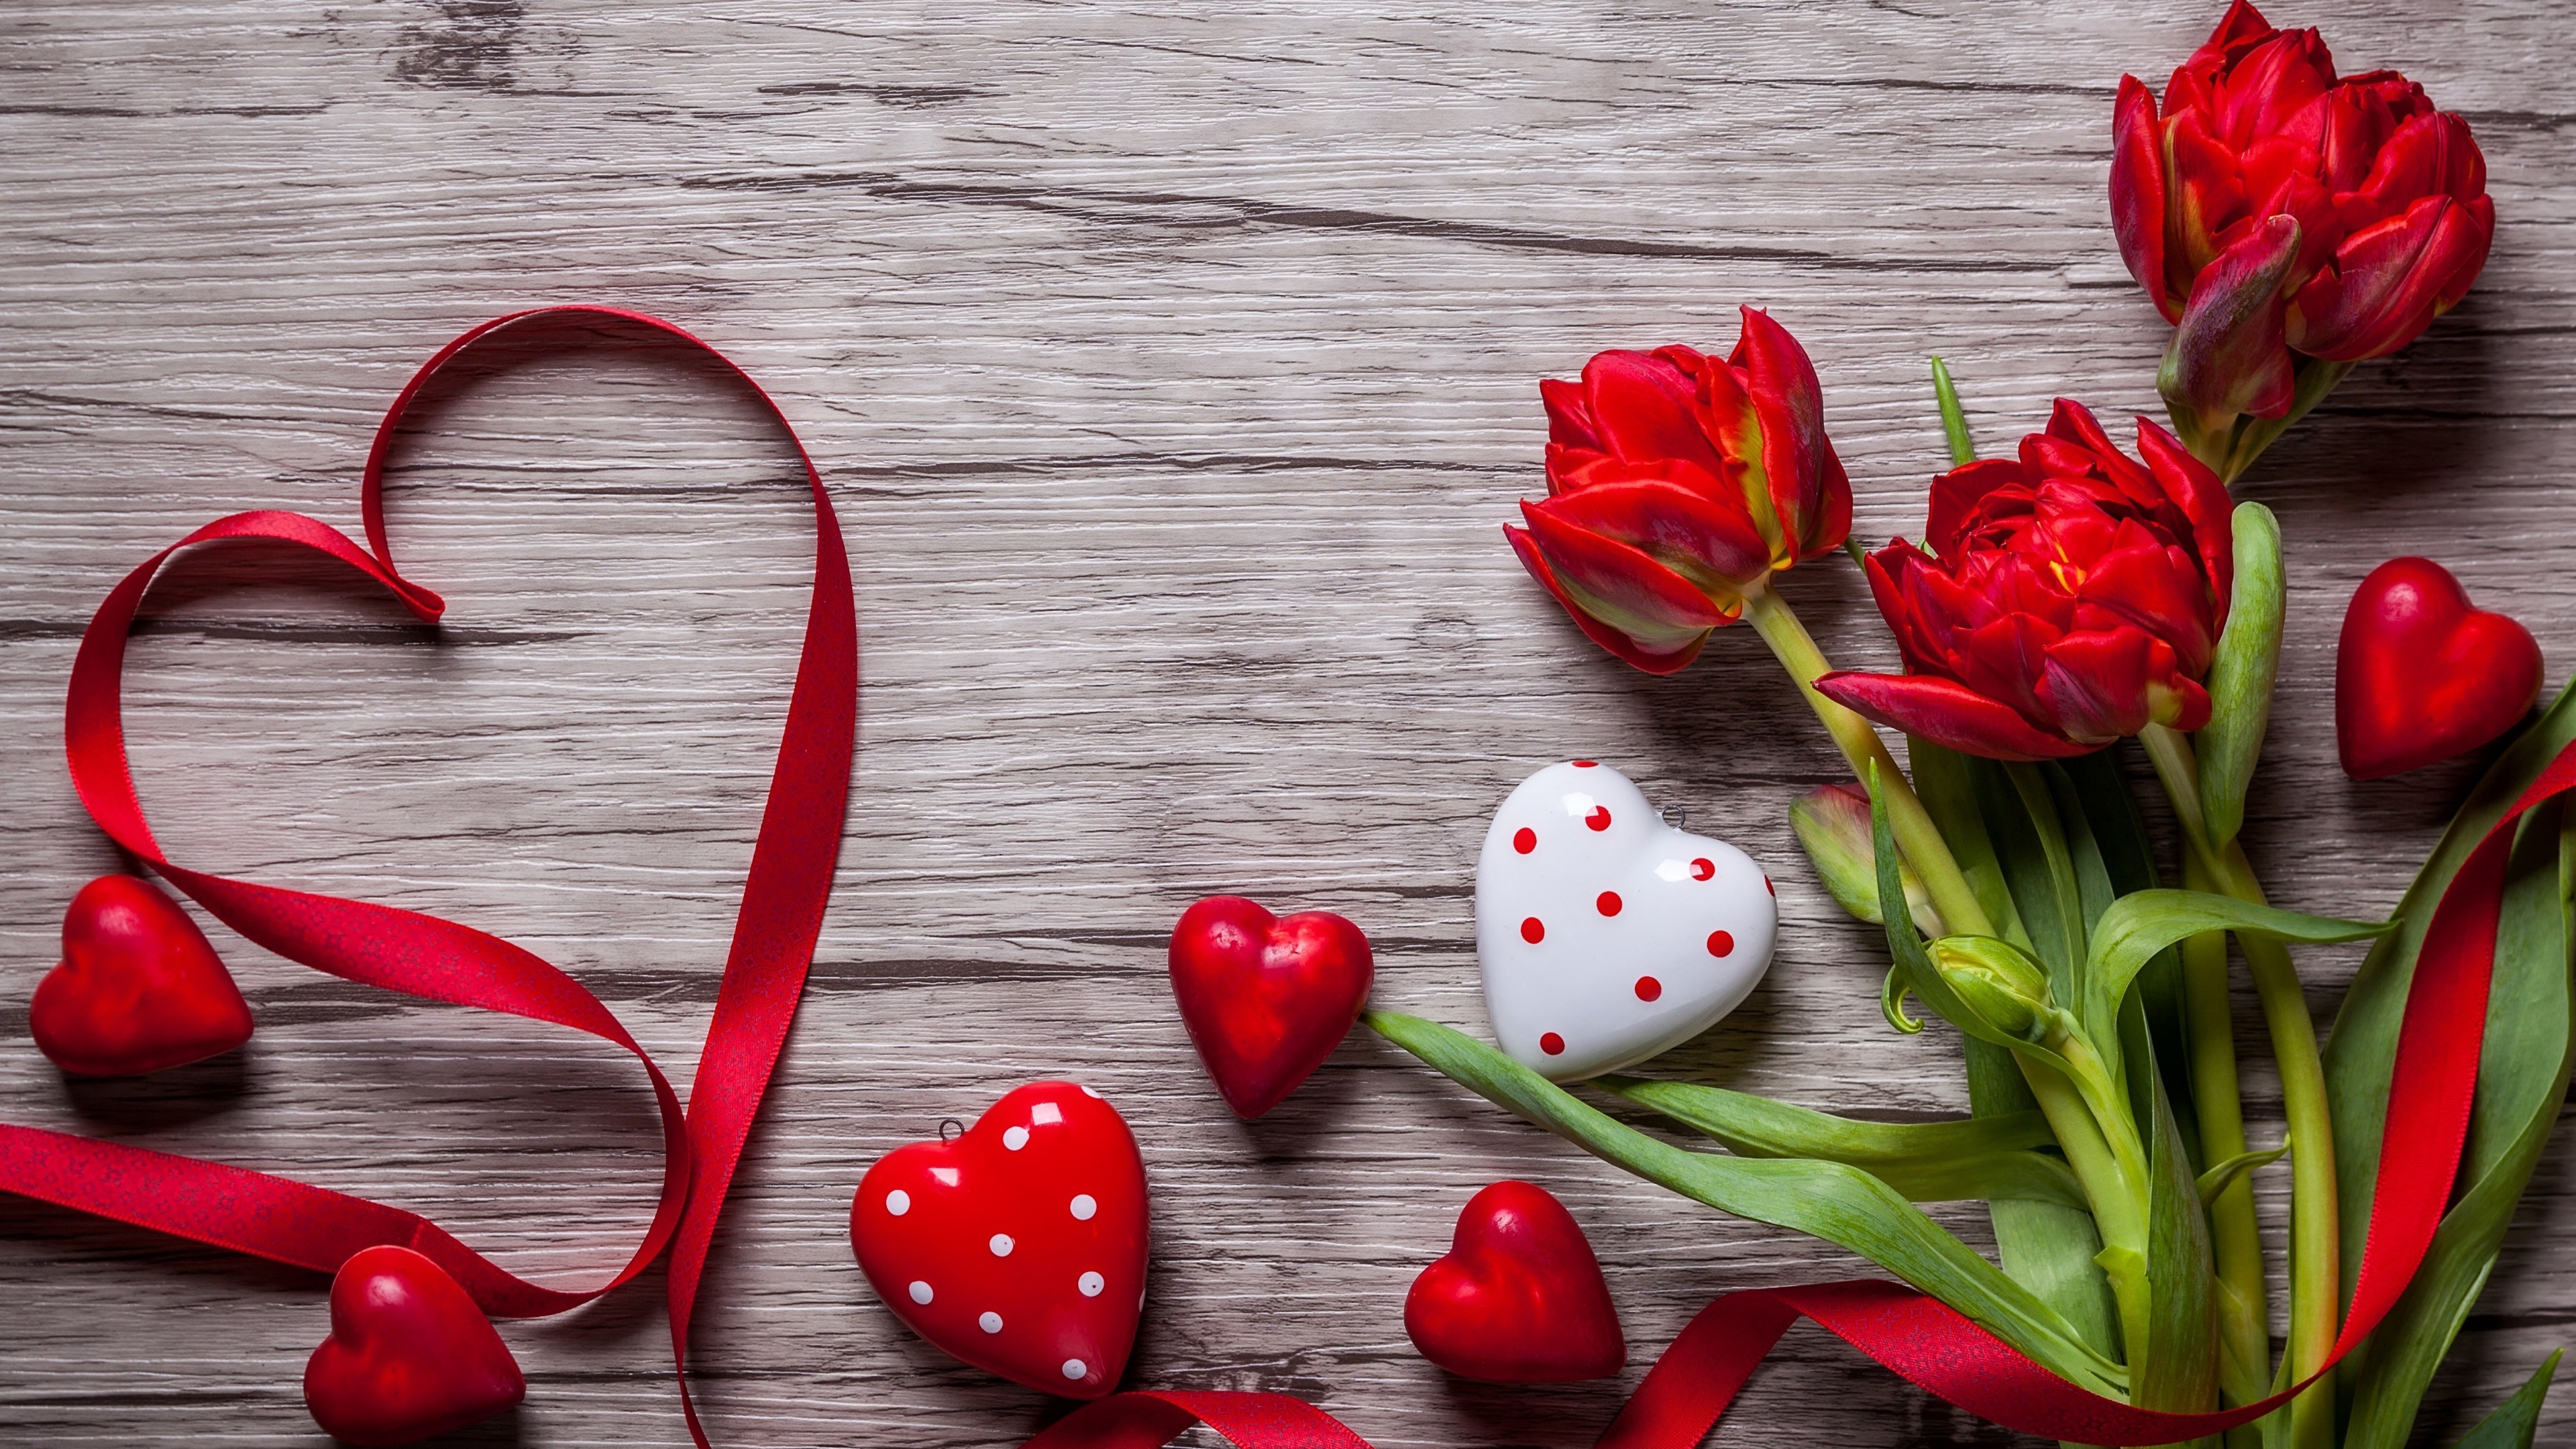 Valentine's Day, Love-filled image, Heart and flowers, Romantic holiday, 3840x2160 4K Desktop